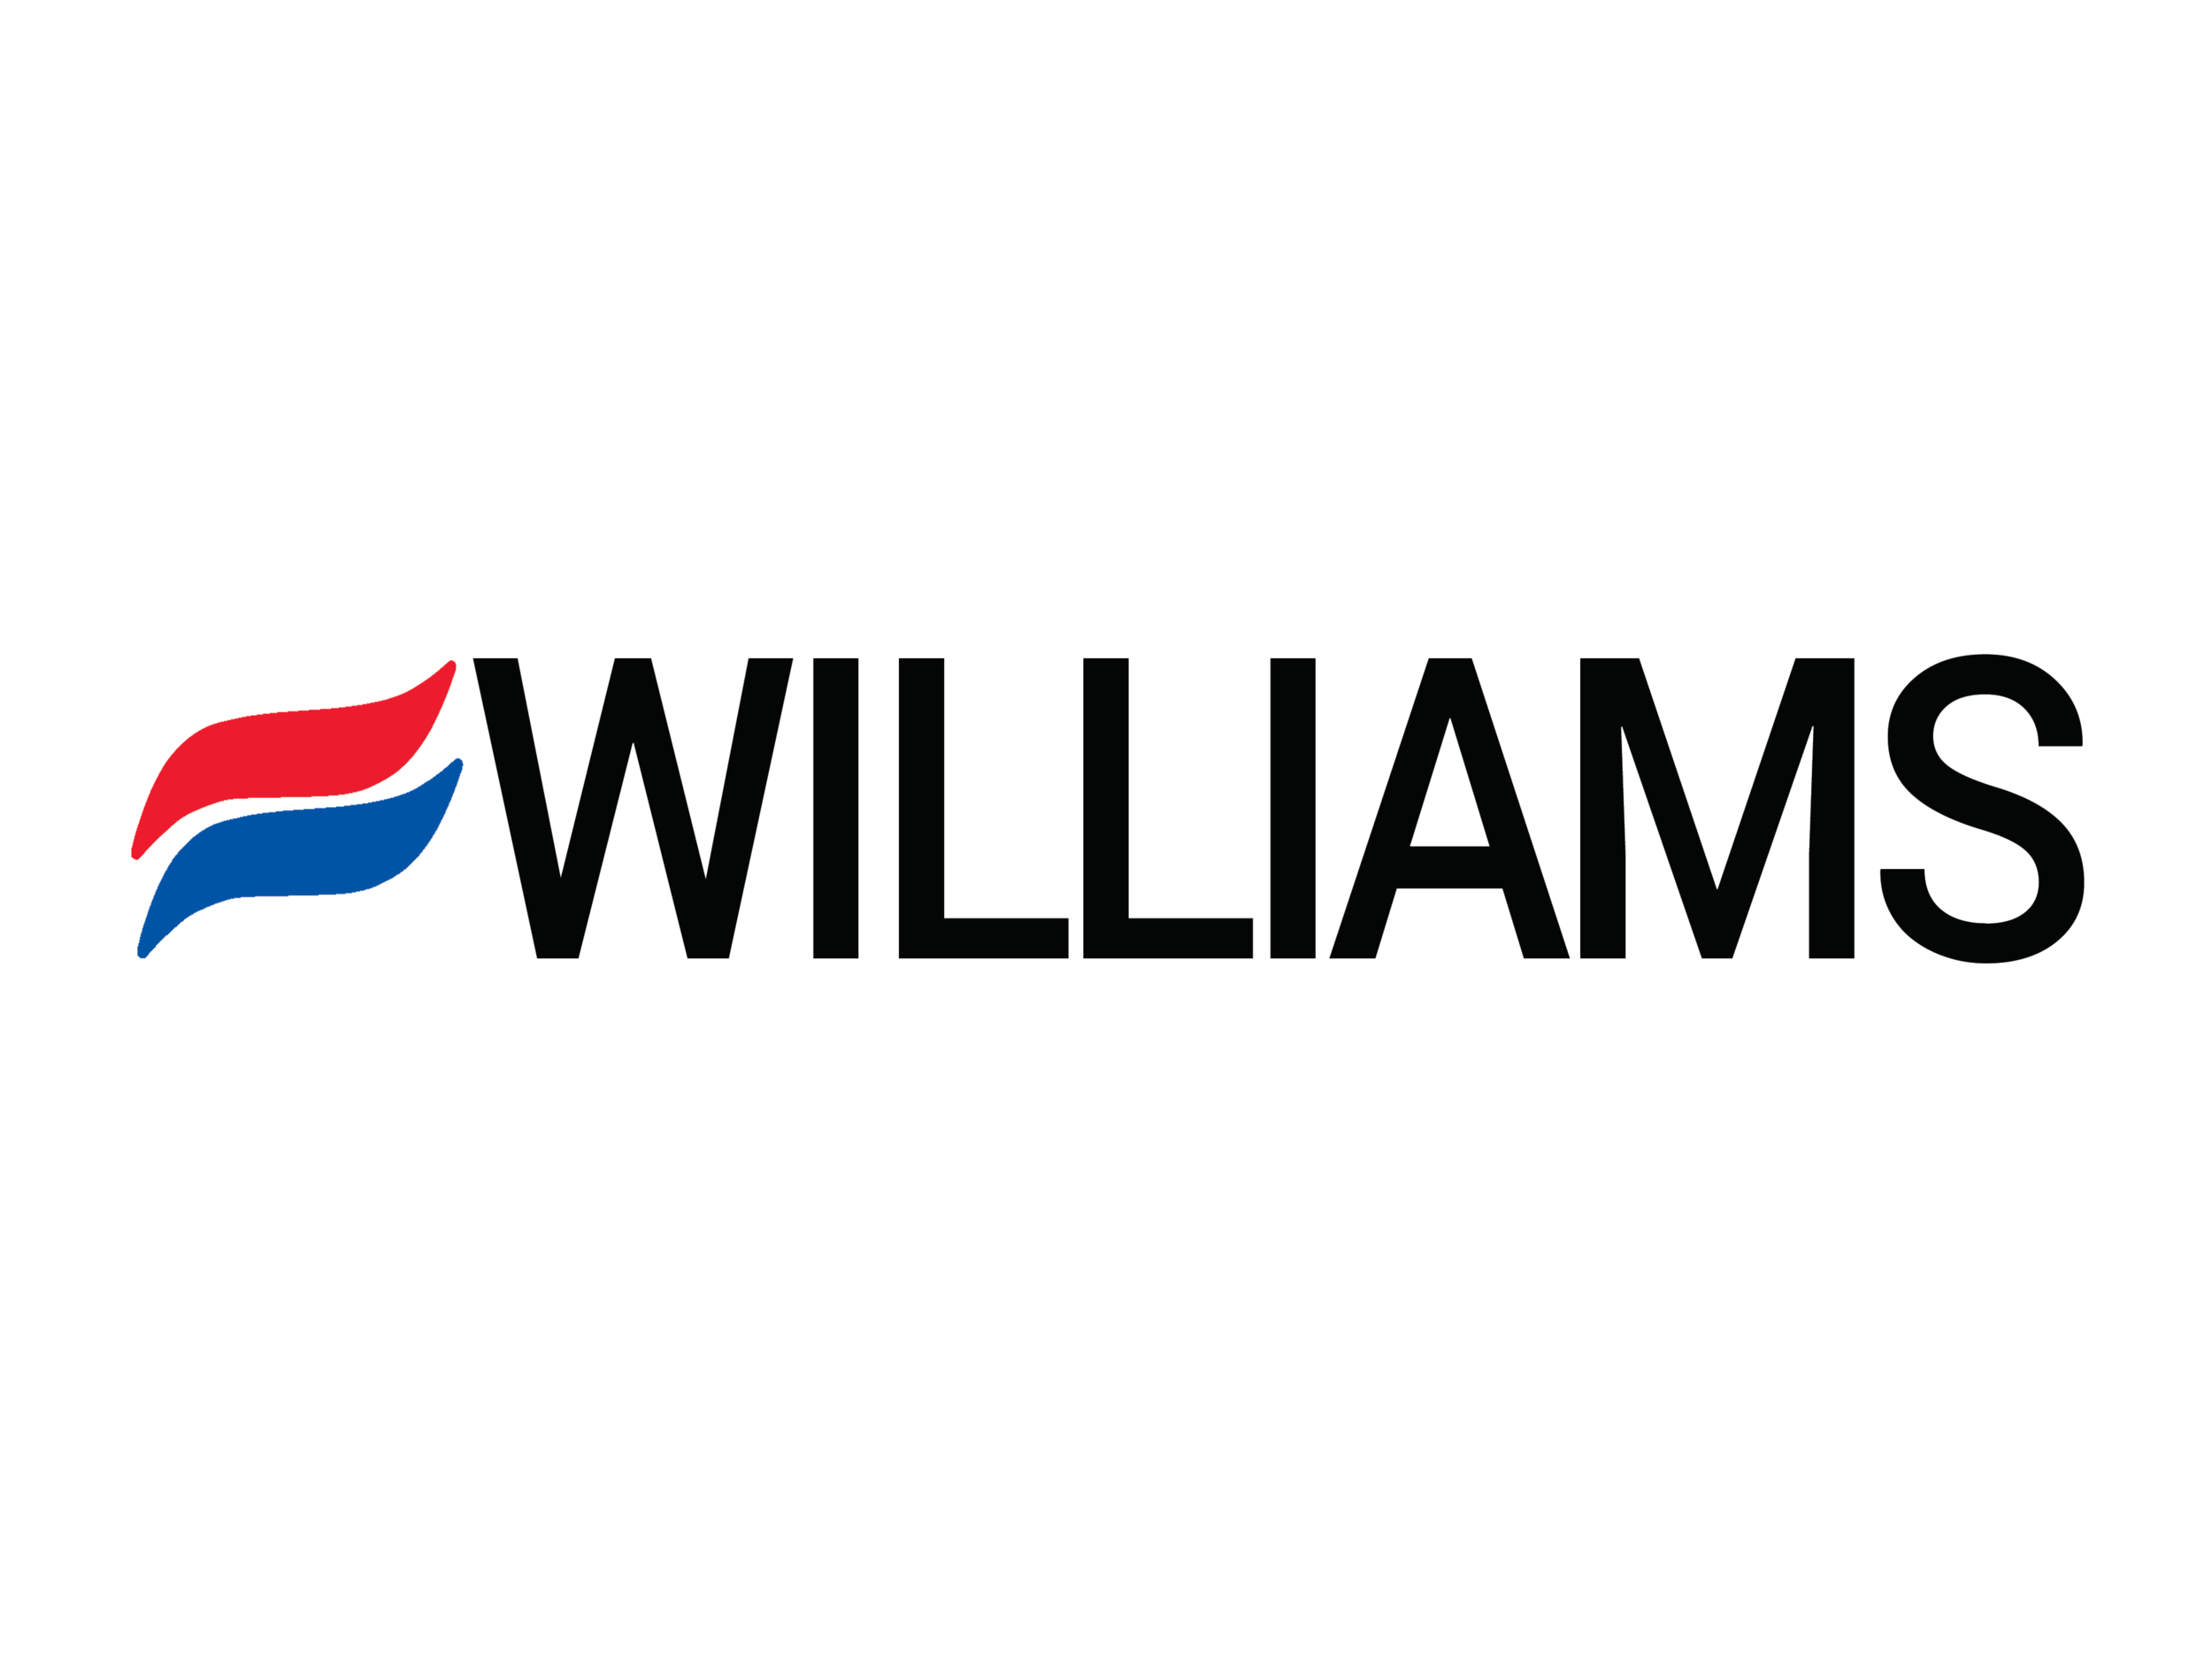 WILLIAMS COMFORT PRODUCTS 2018.png